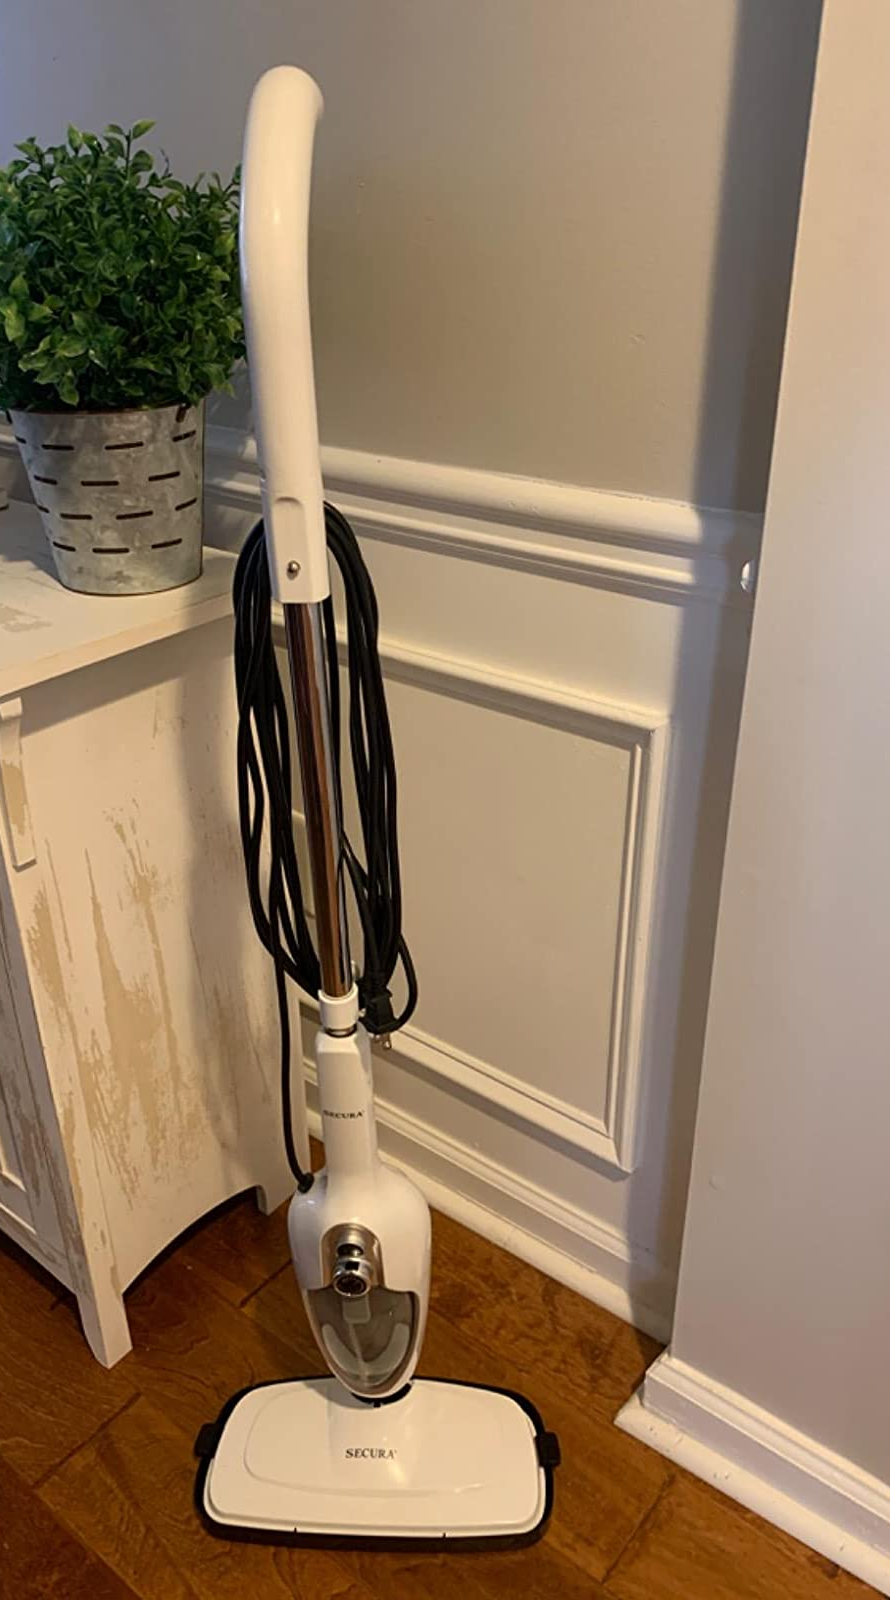 Steam The Floors Clean with the Black & Decker Steam Mop - Review